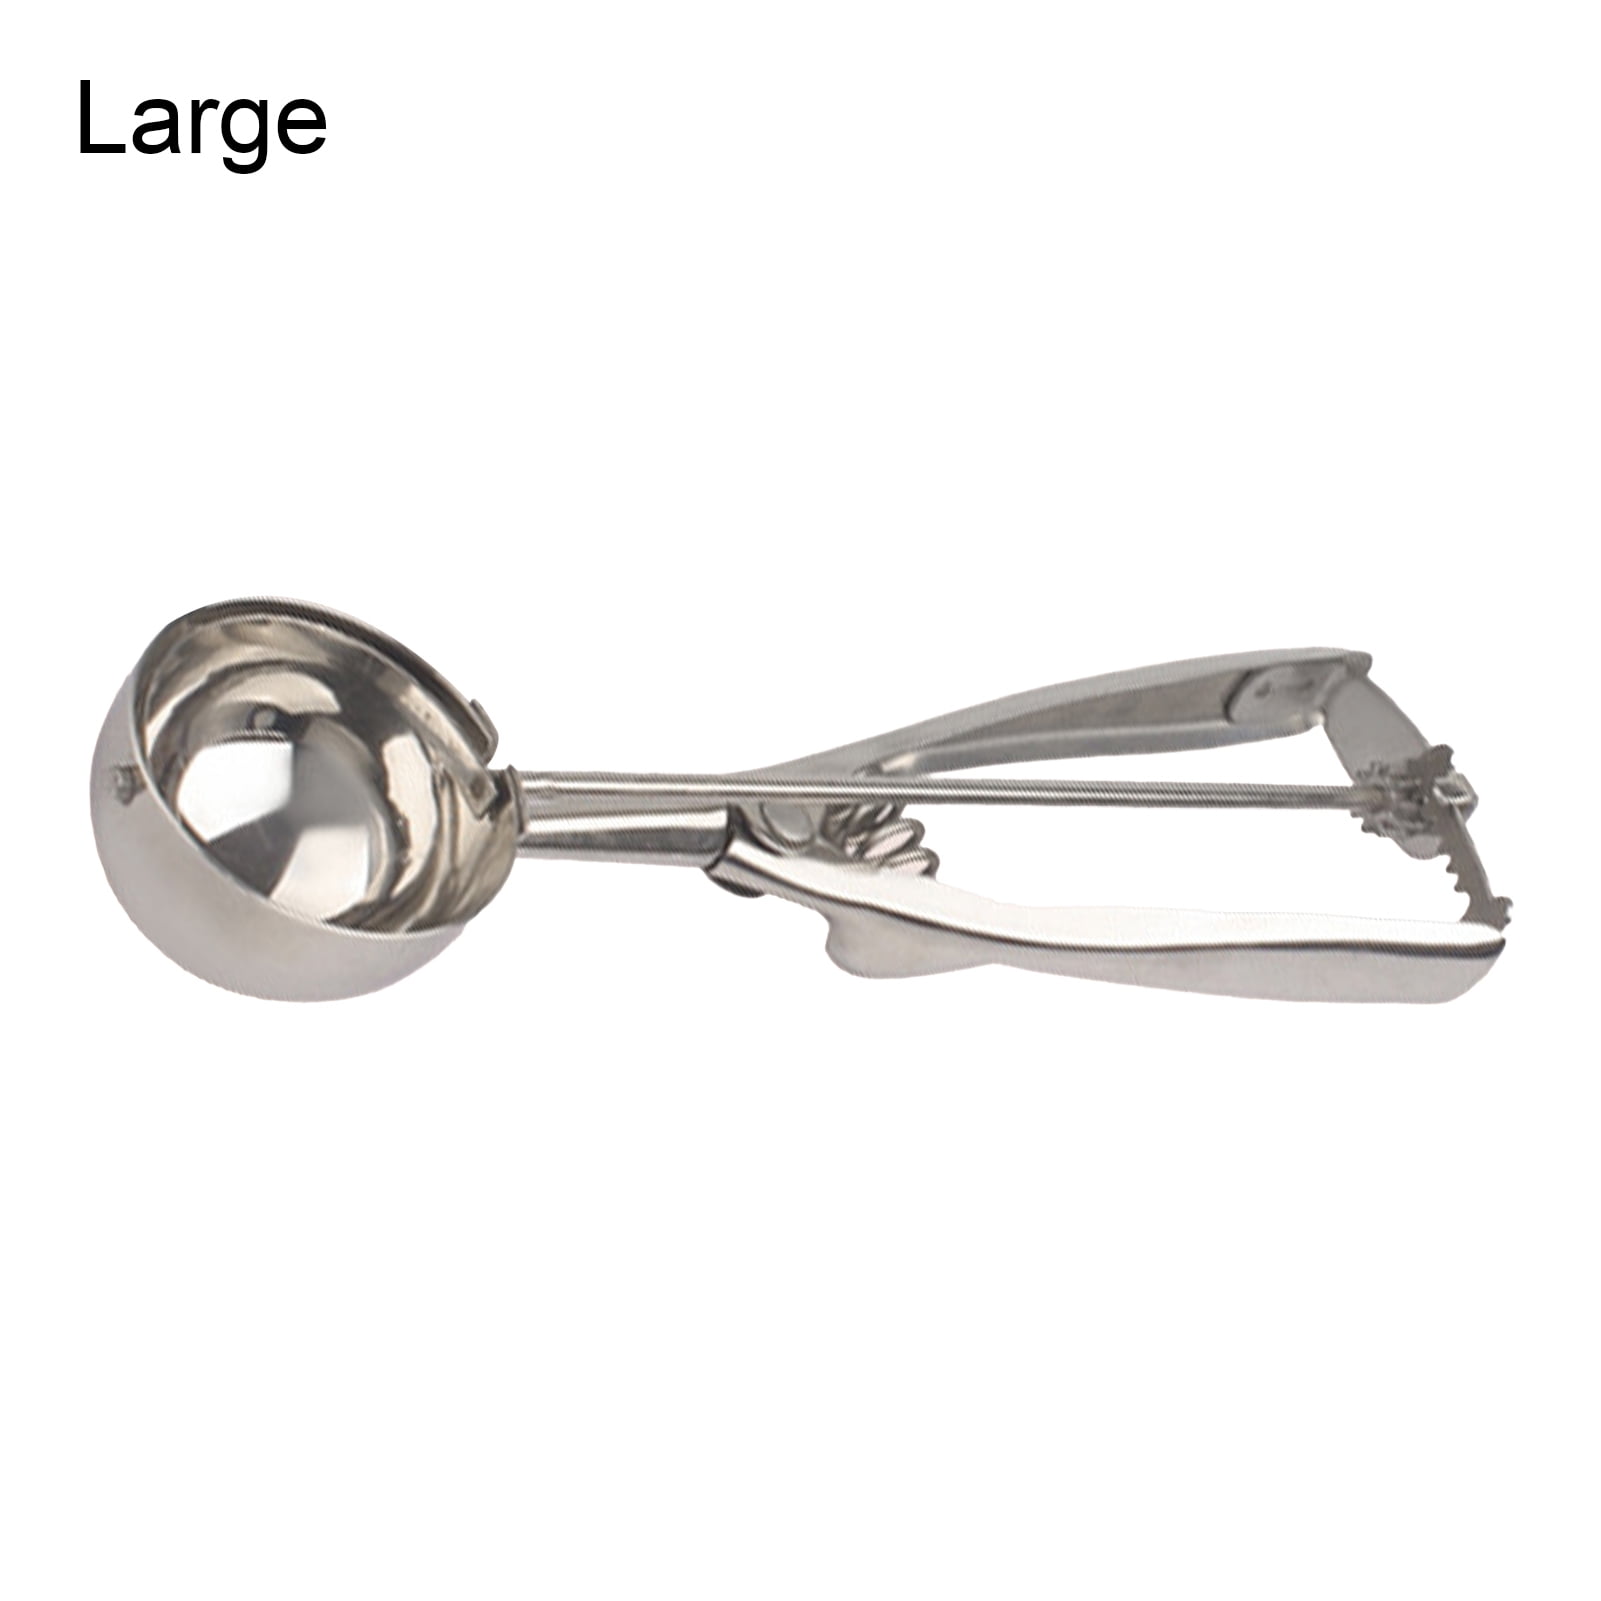 Ludlz Stainless Steel Ice Cream Scooper with Trigger, Small, Medium and Large Cookie Scoops for Baking, Easy to Clean, Highly Durable, Ergonomic